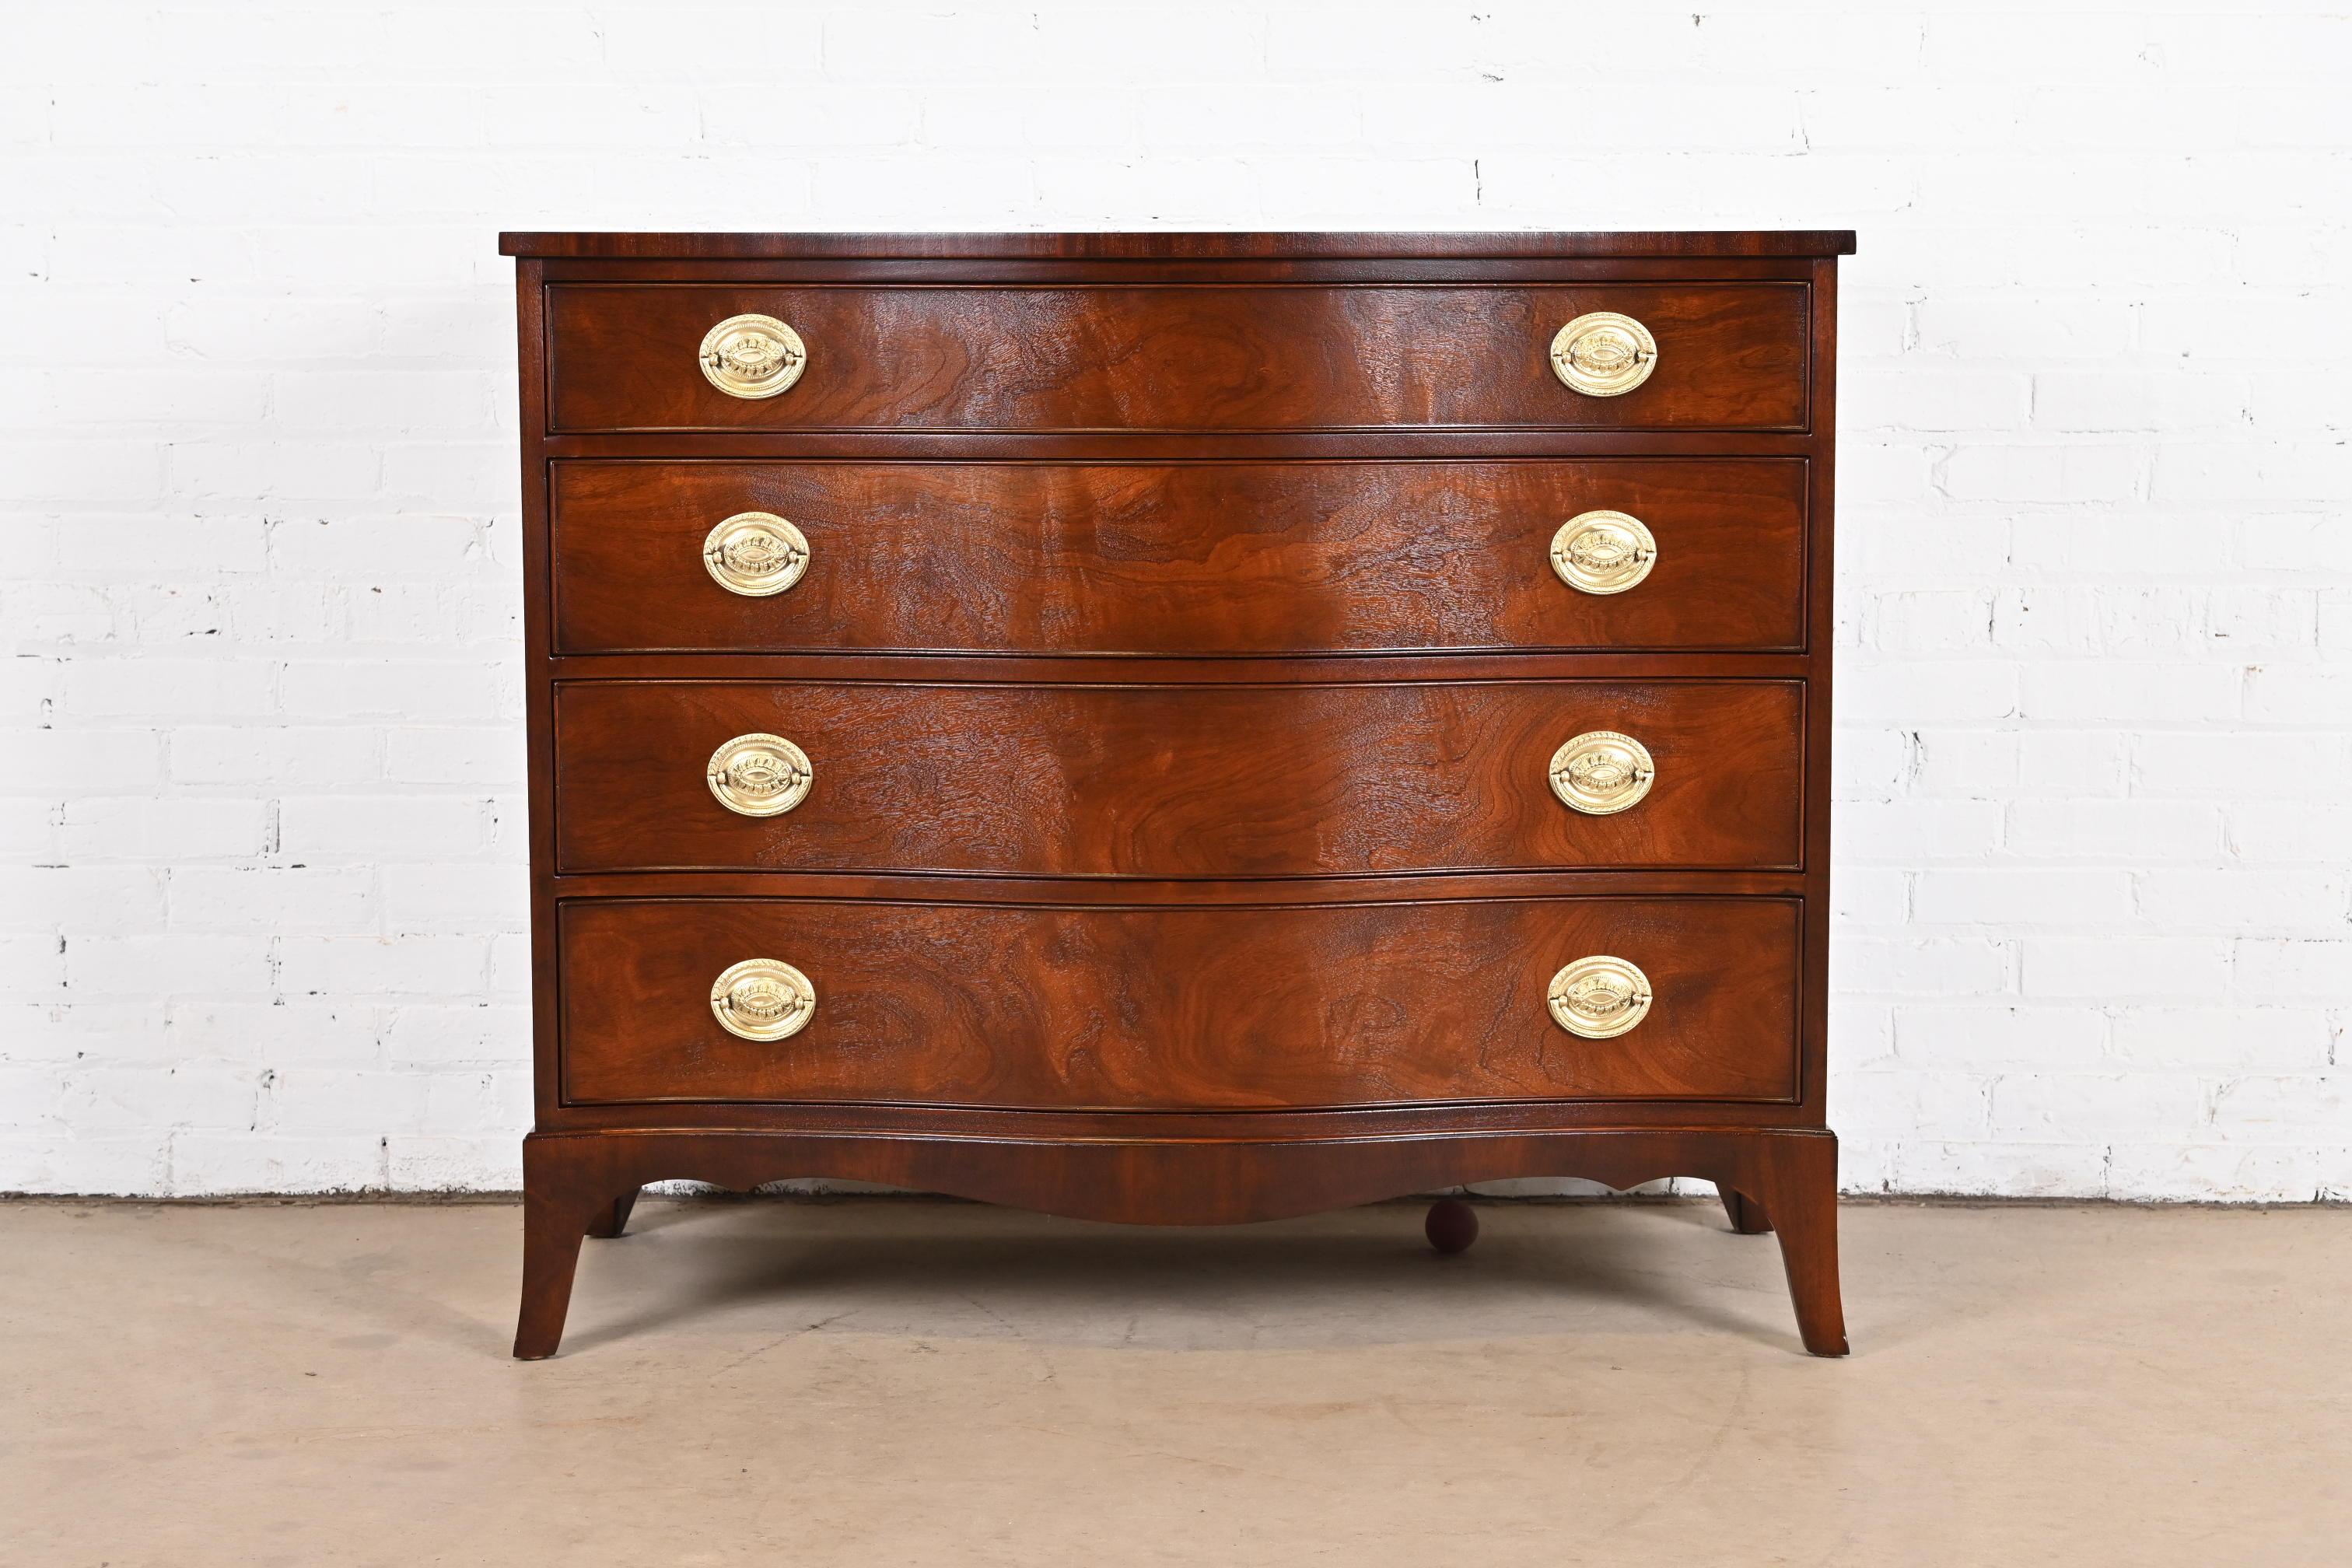 American Kindel Furniture Georgian Mahogany Serpentine Front Chest of Drawers, Refinished